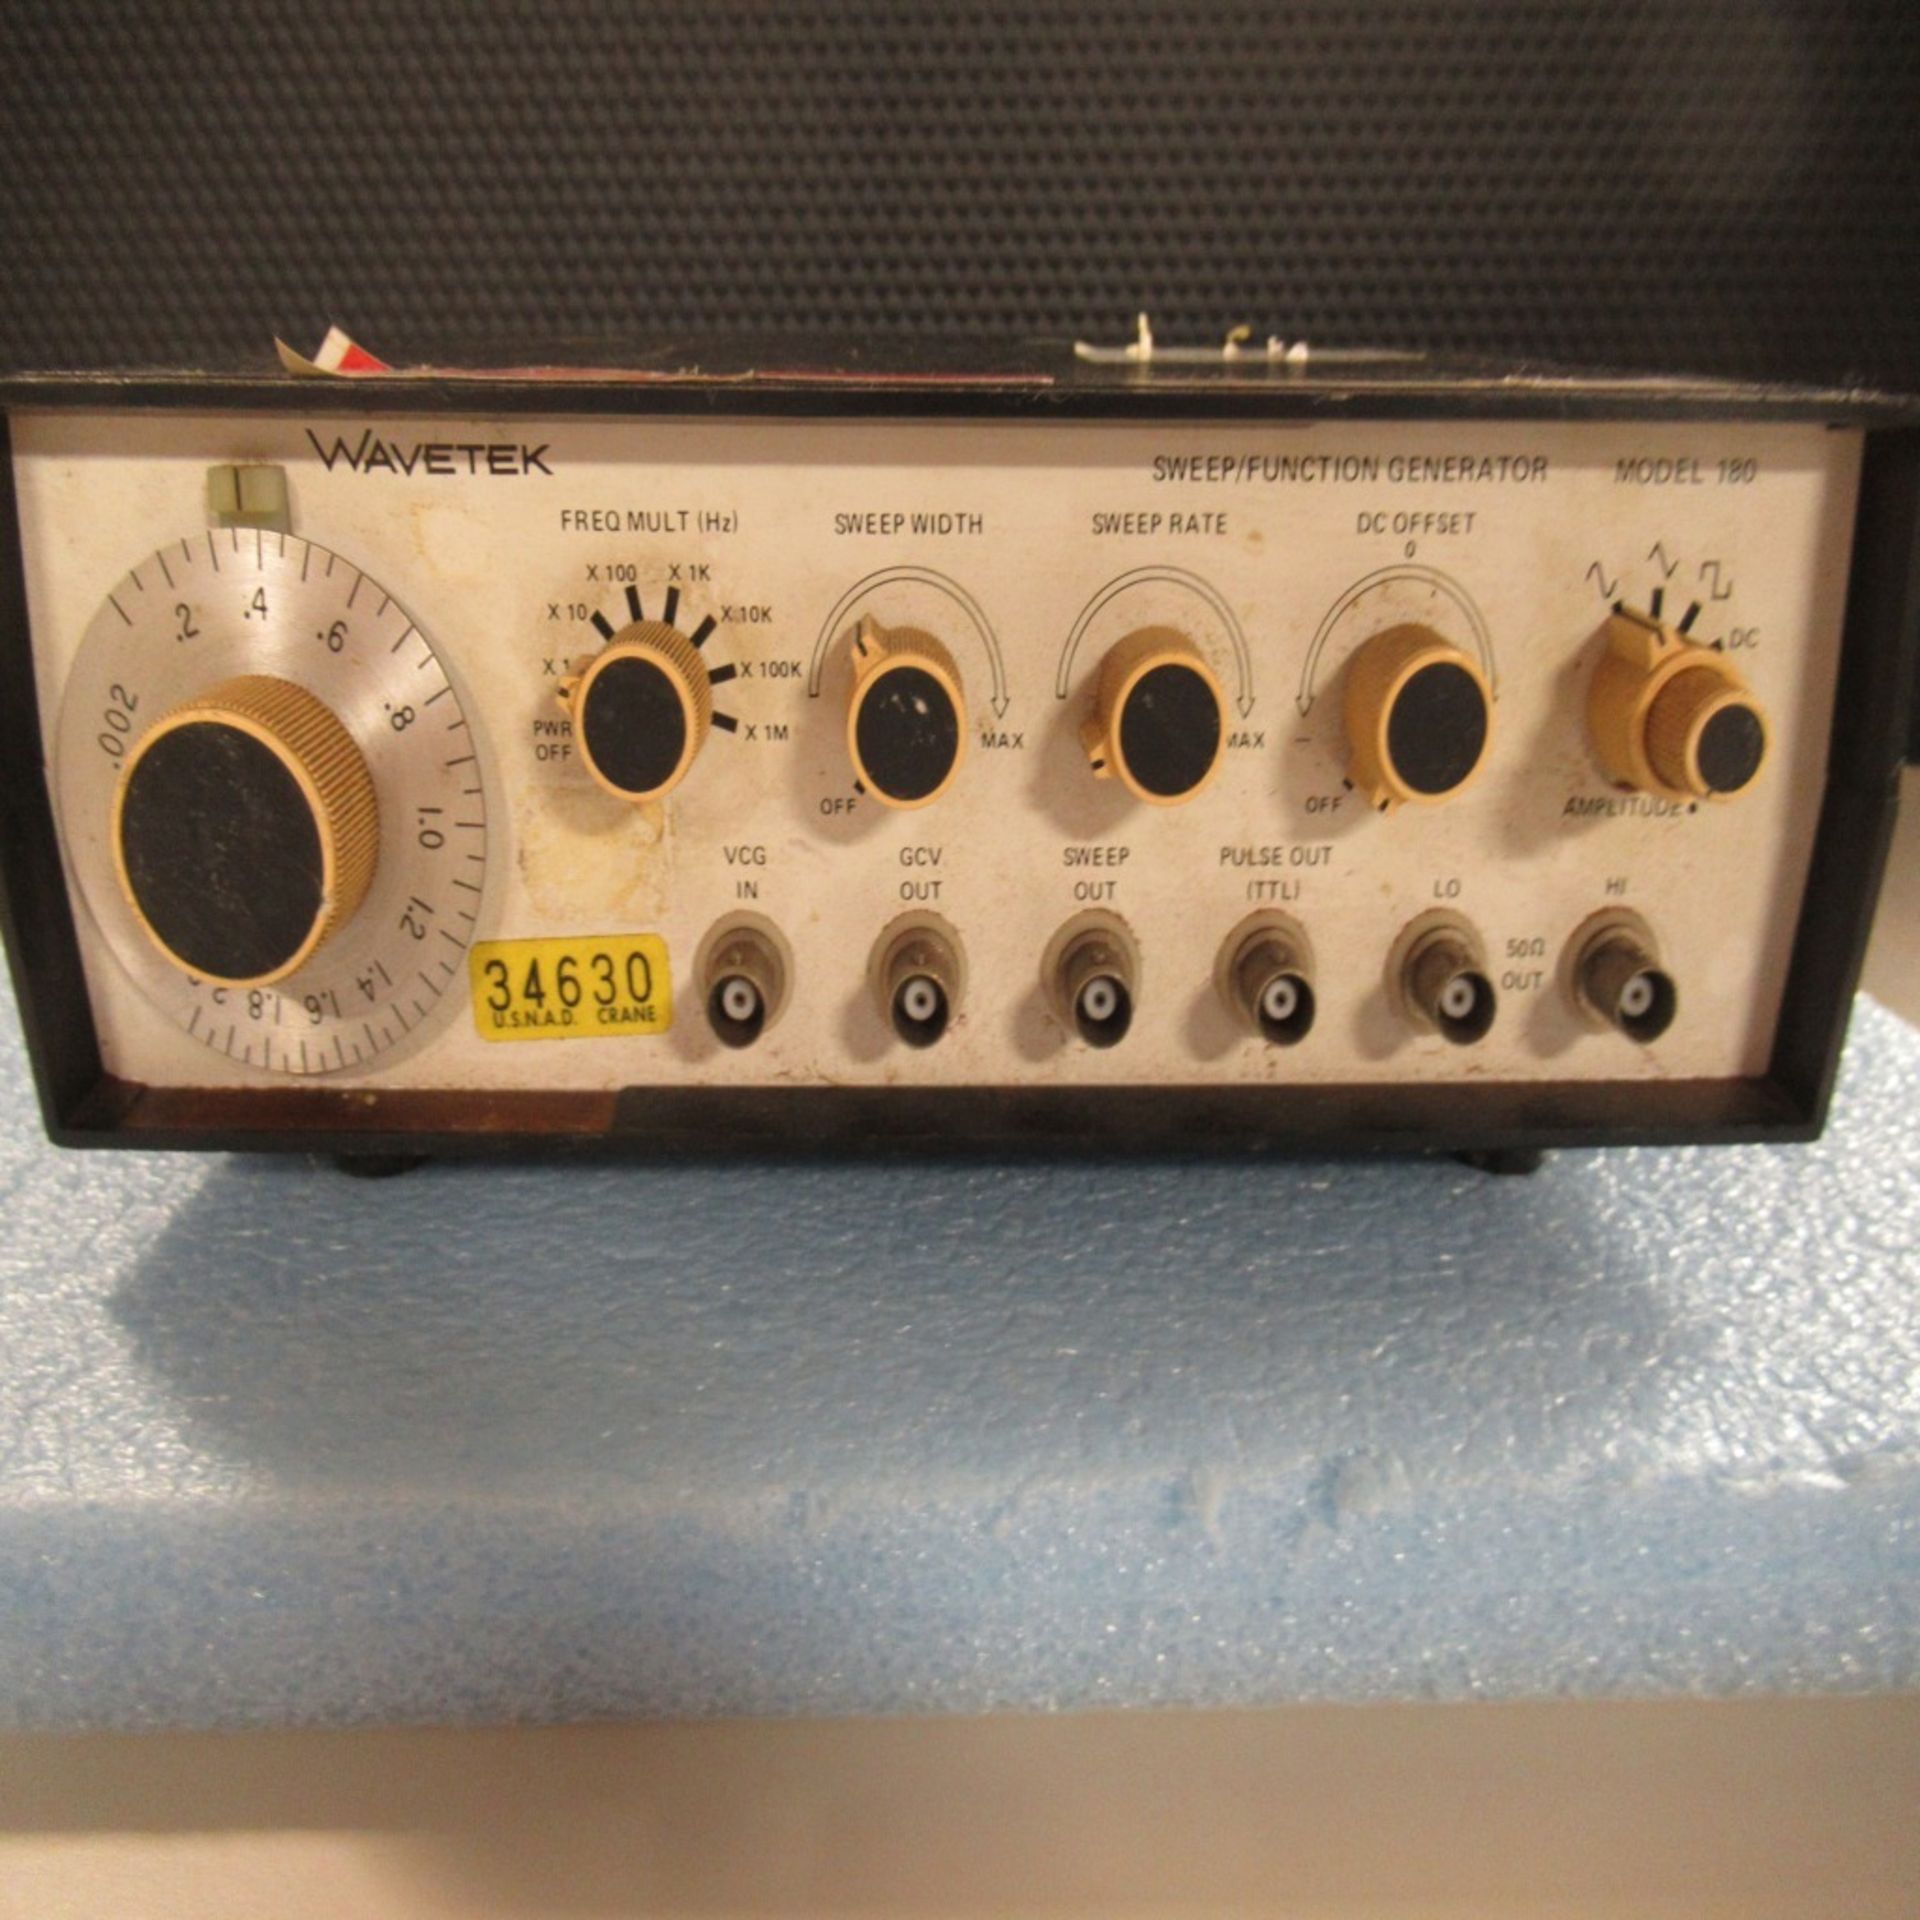 PHOTON SNAP SHOT MODEL 6000 *POWERS ON* NO SCREEN DISPLAY; FARNELL AP20-80 REGULATED POWER SUPPLY * - Image 164 of 222